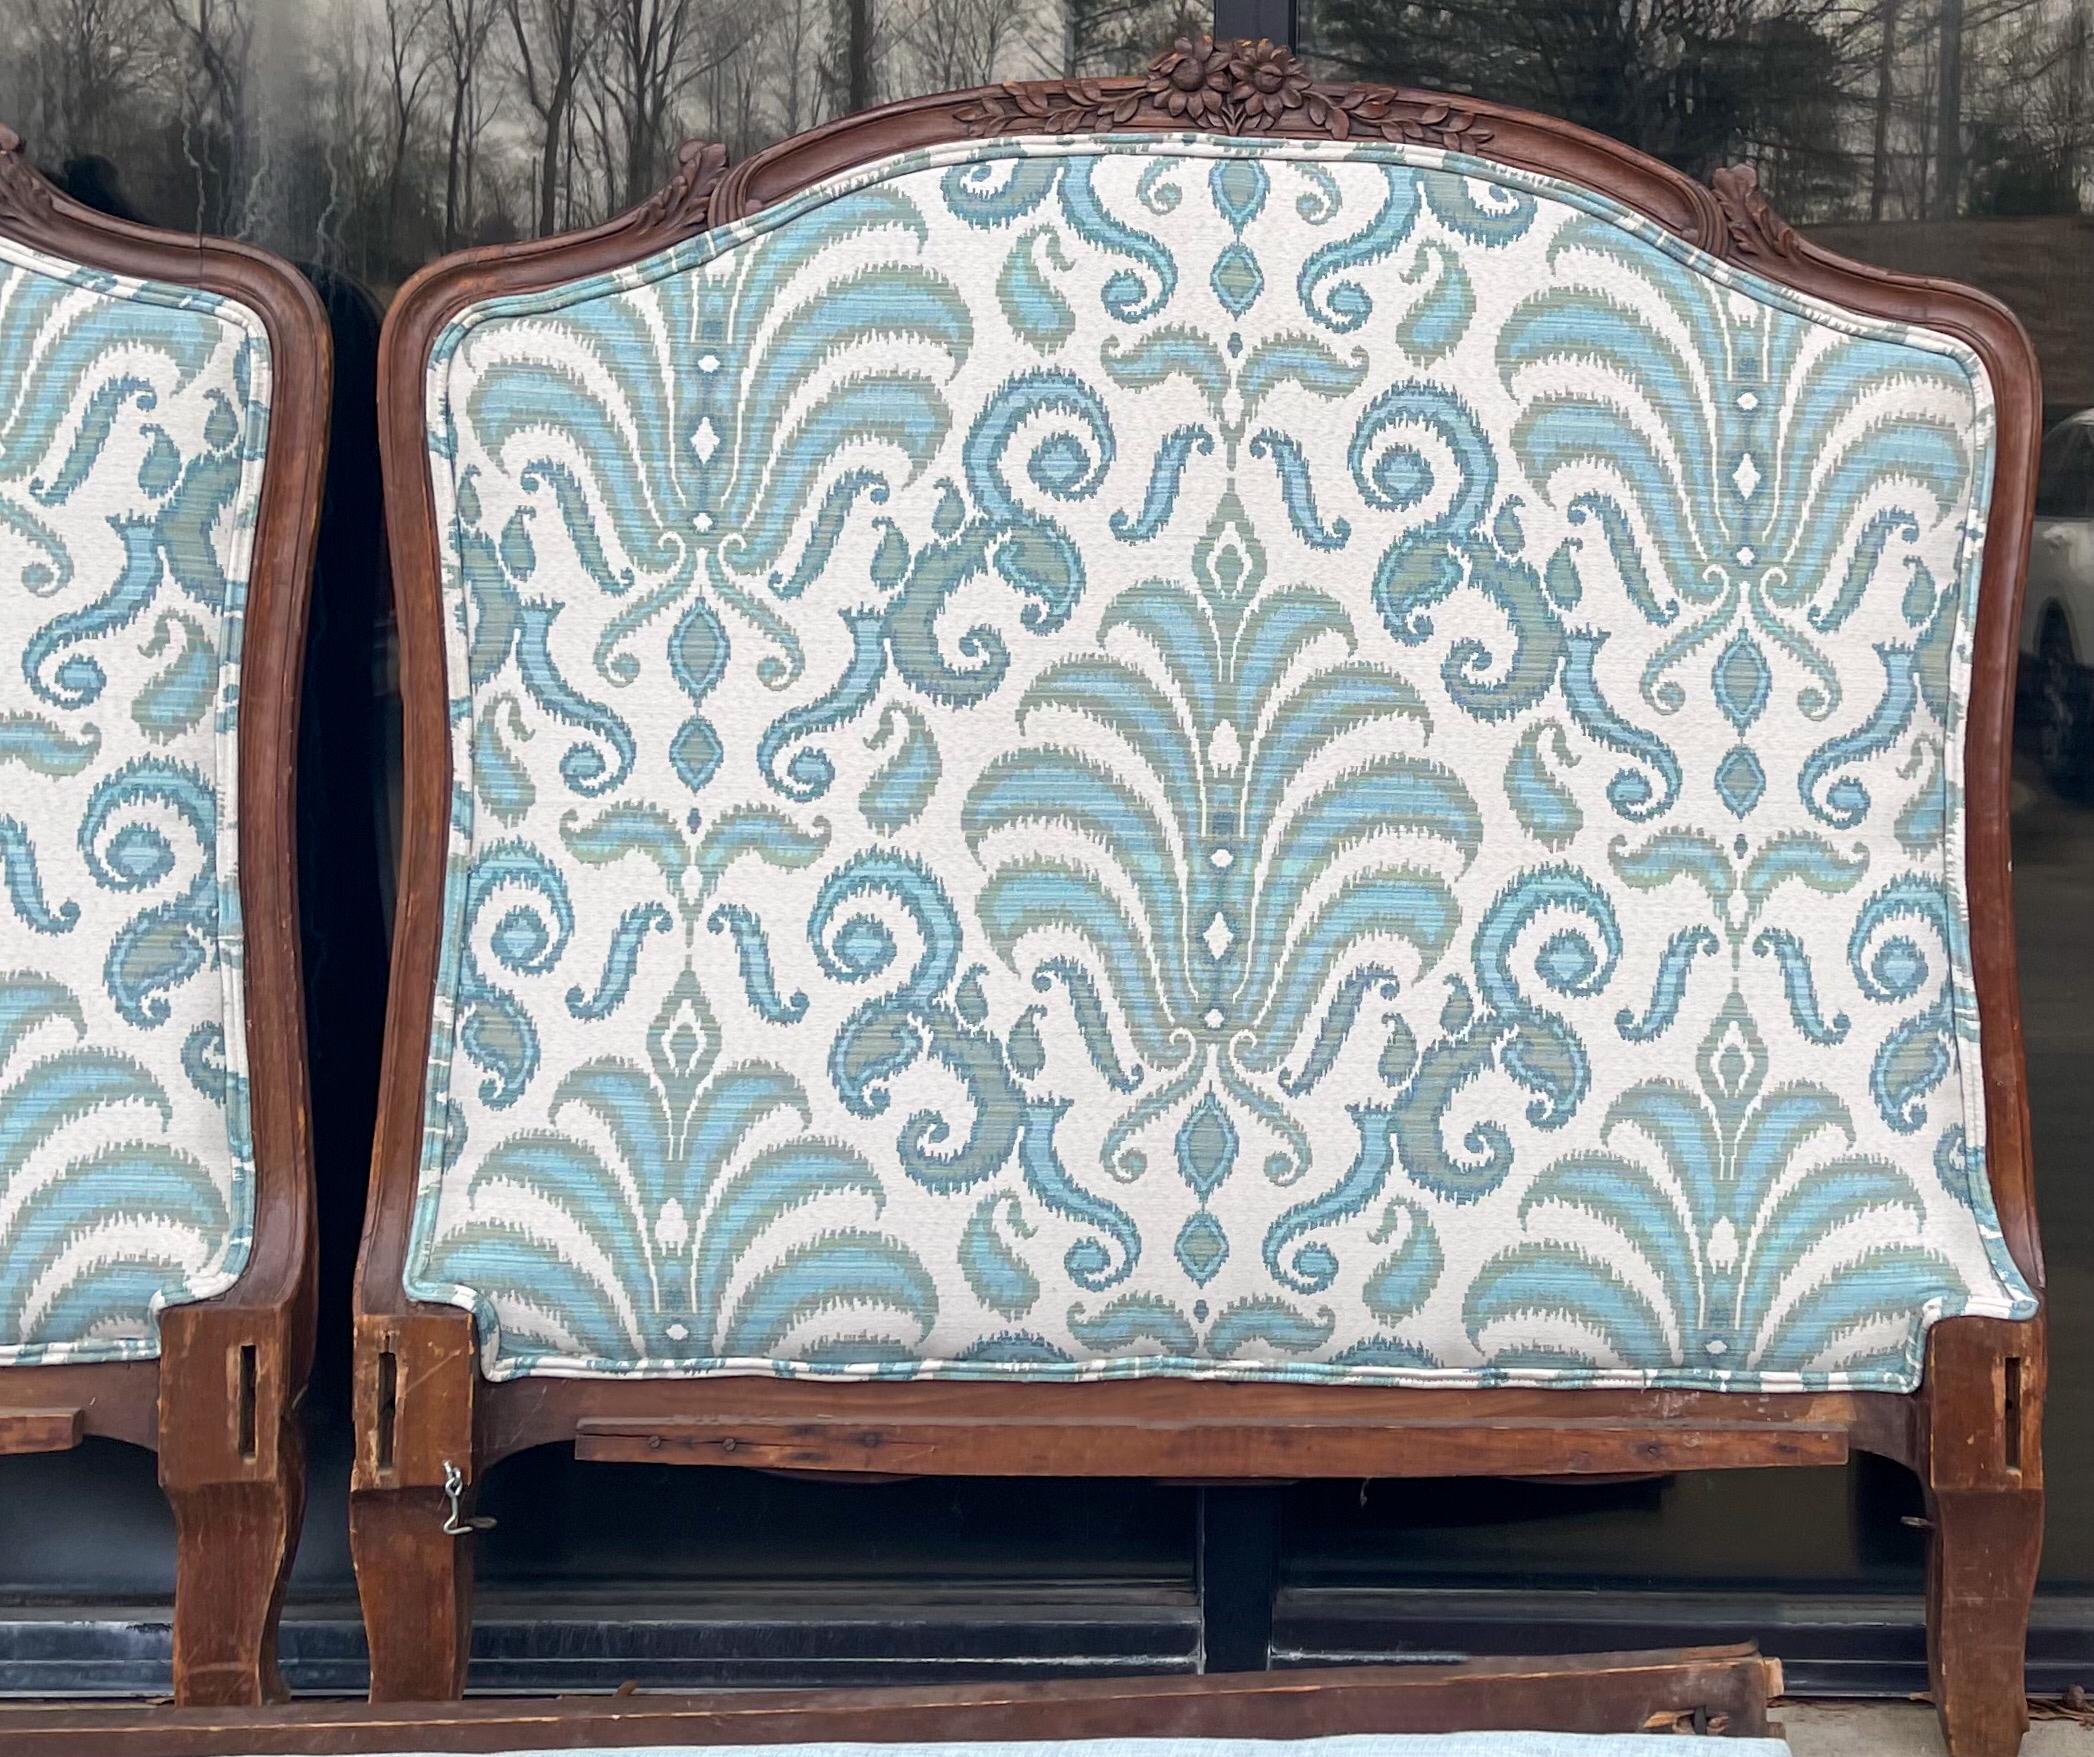 20th Century Early 20th-C. French Carved Oak Daybed or Twin Headboards in Turquoise